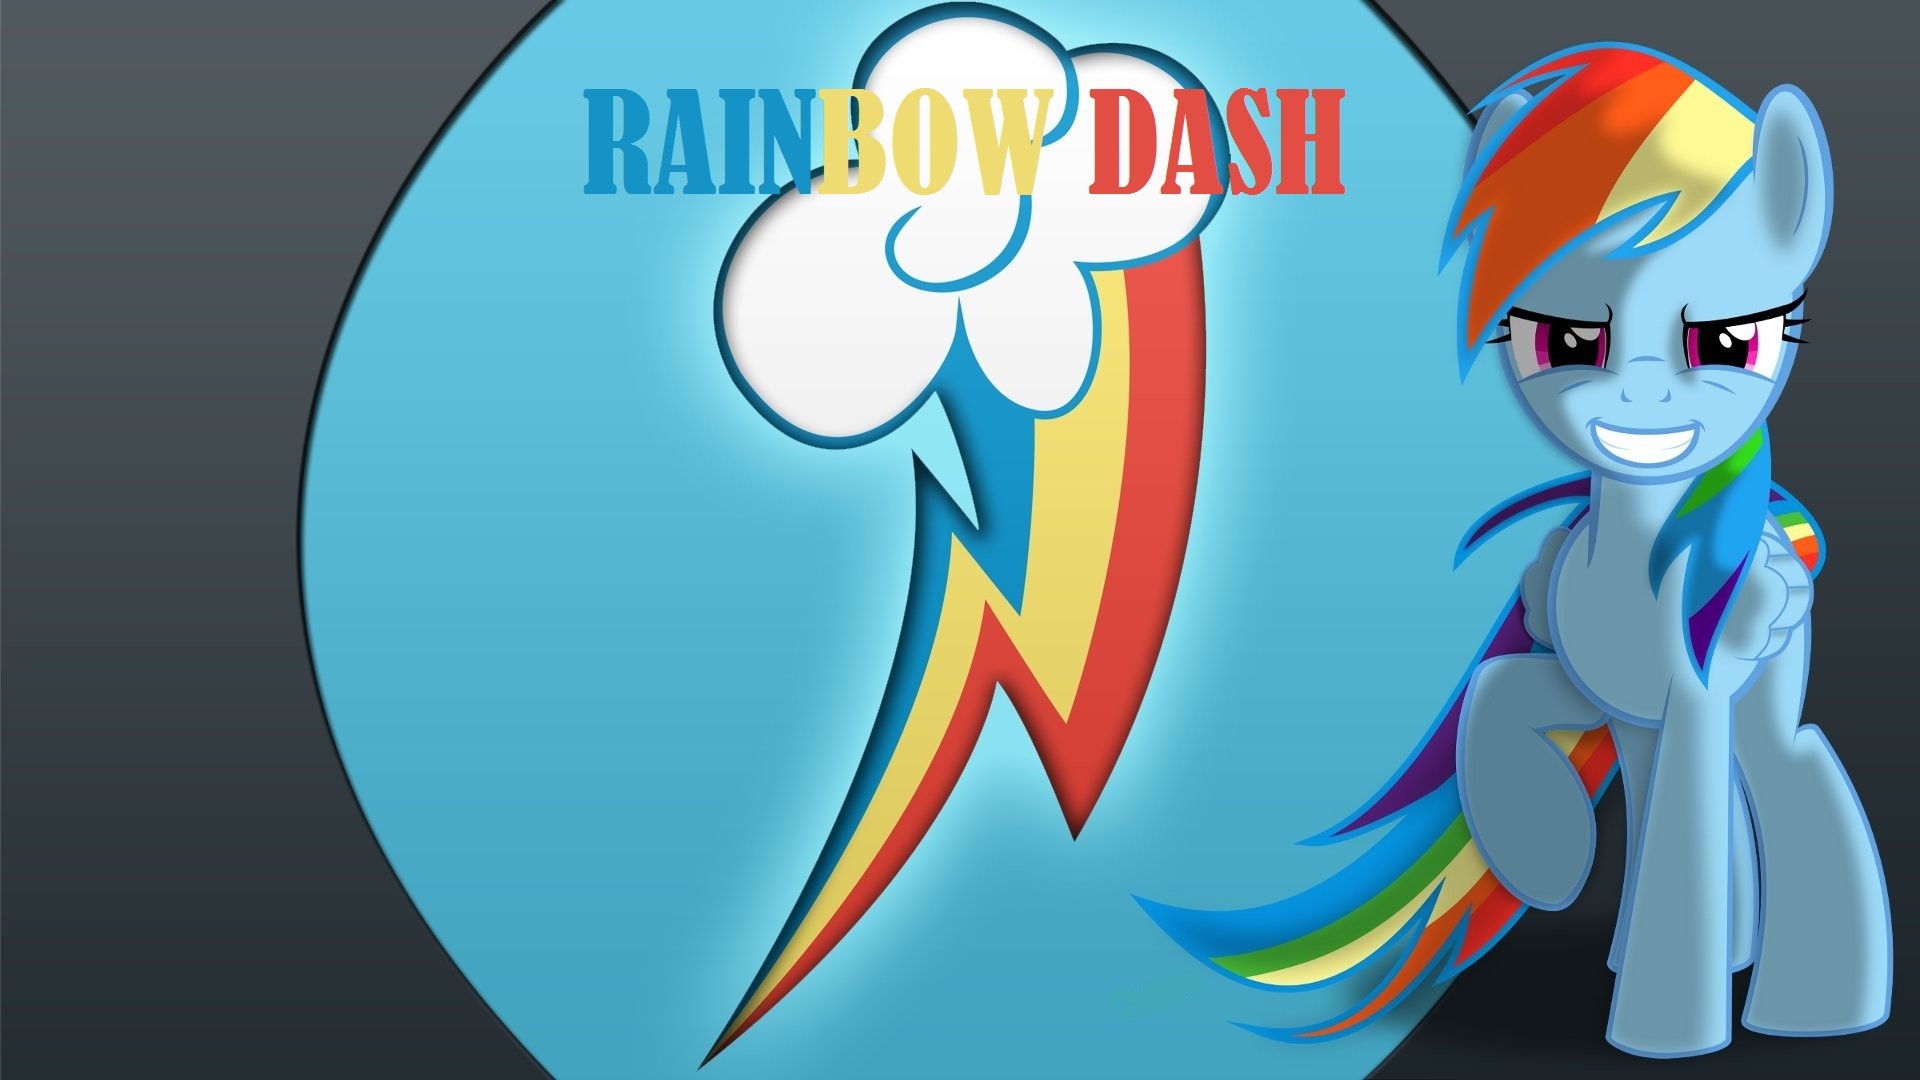 1920x1080 Wallpaper Awesome Rainbow Dash by Barrfind Wallpaper Awesome Rainbow Dash  by Barrfind